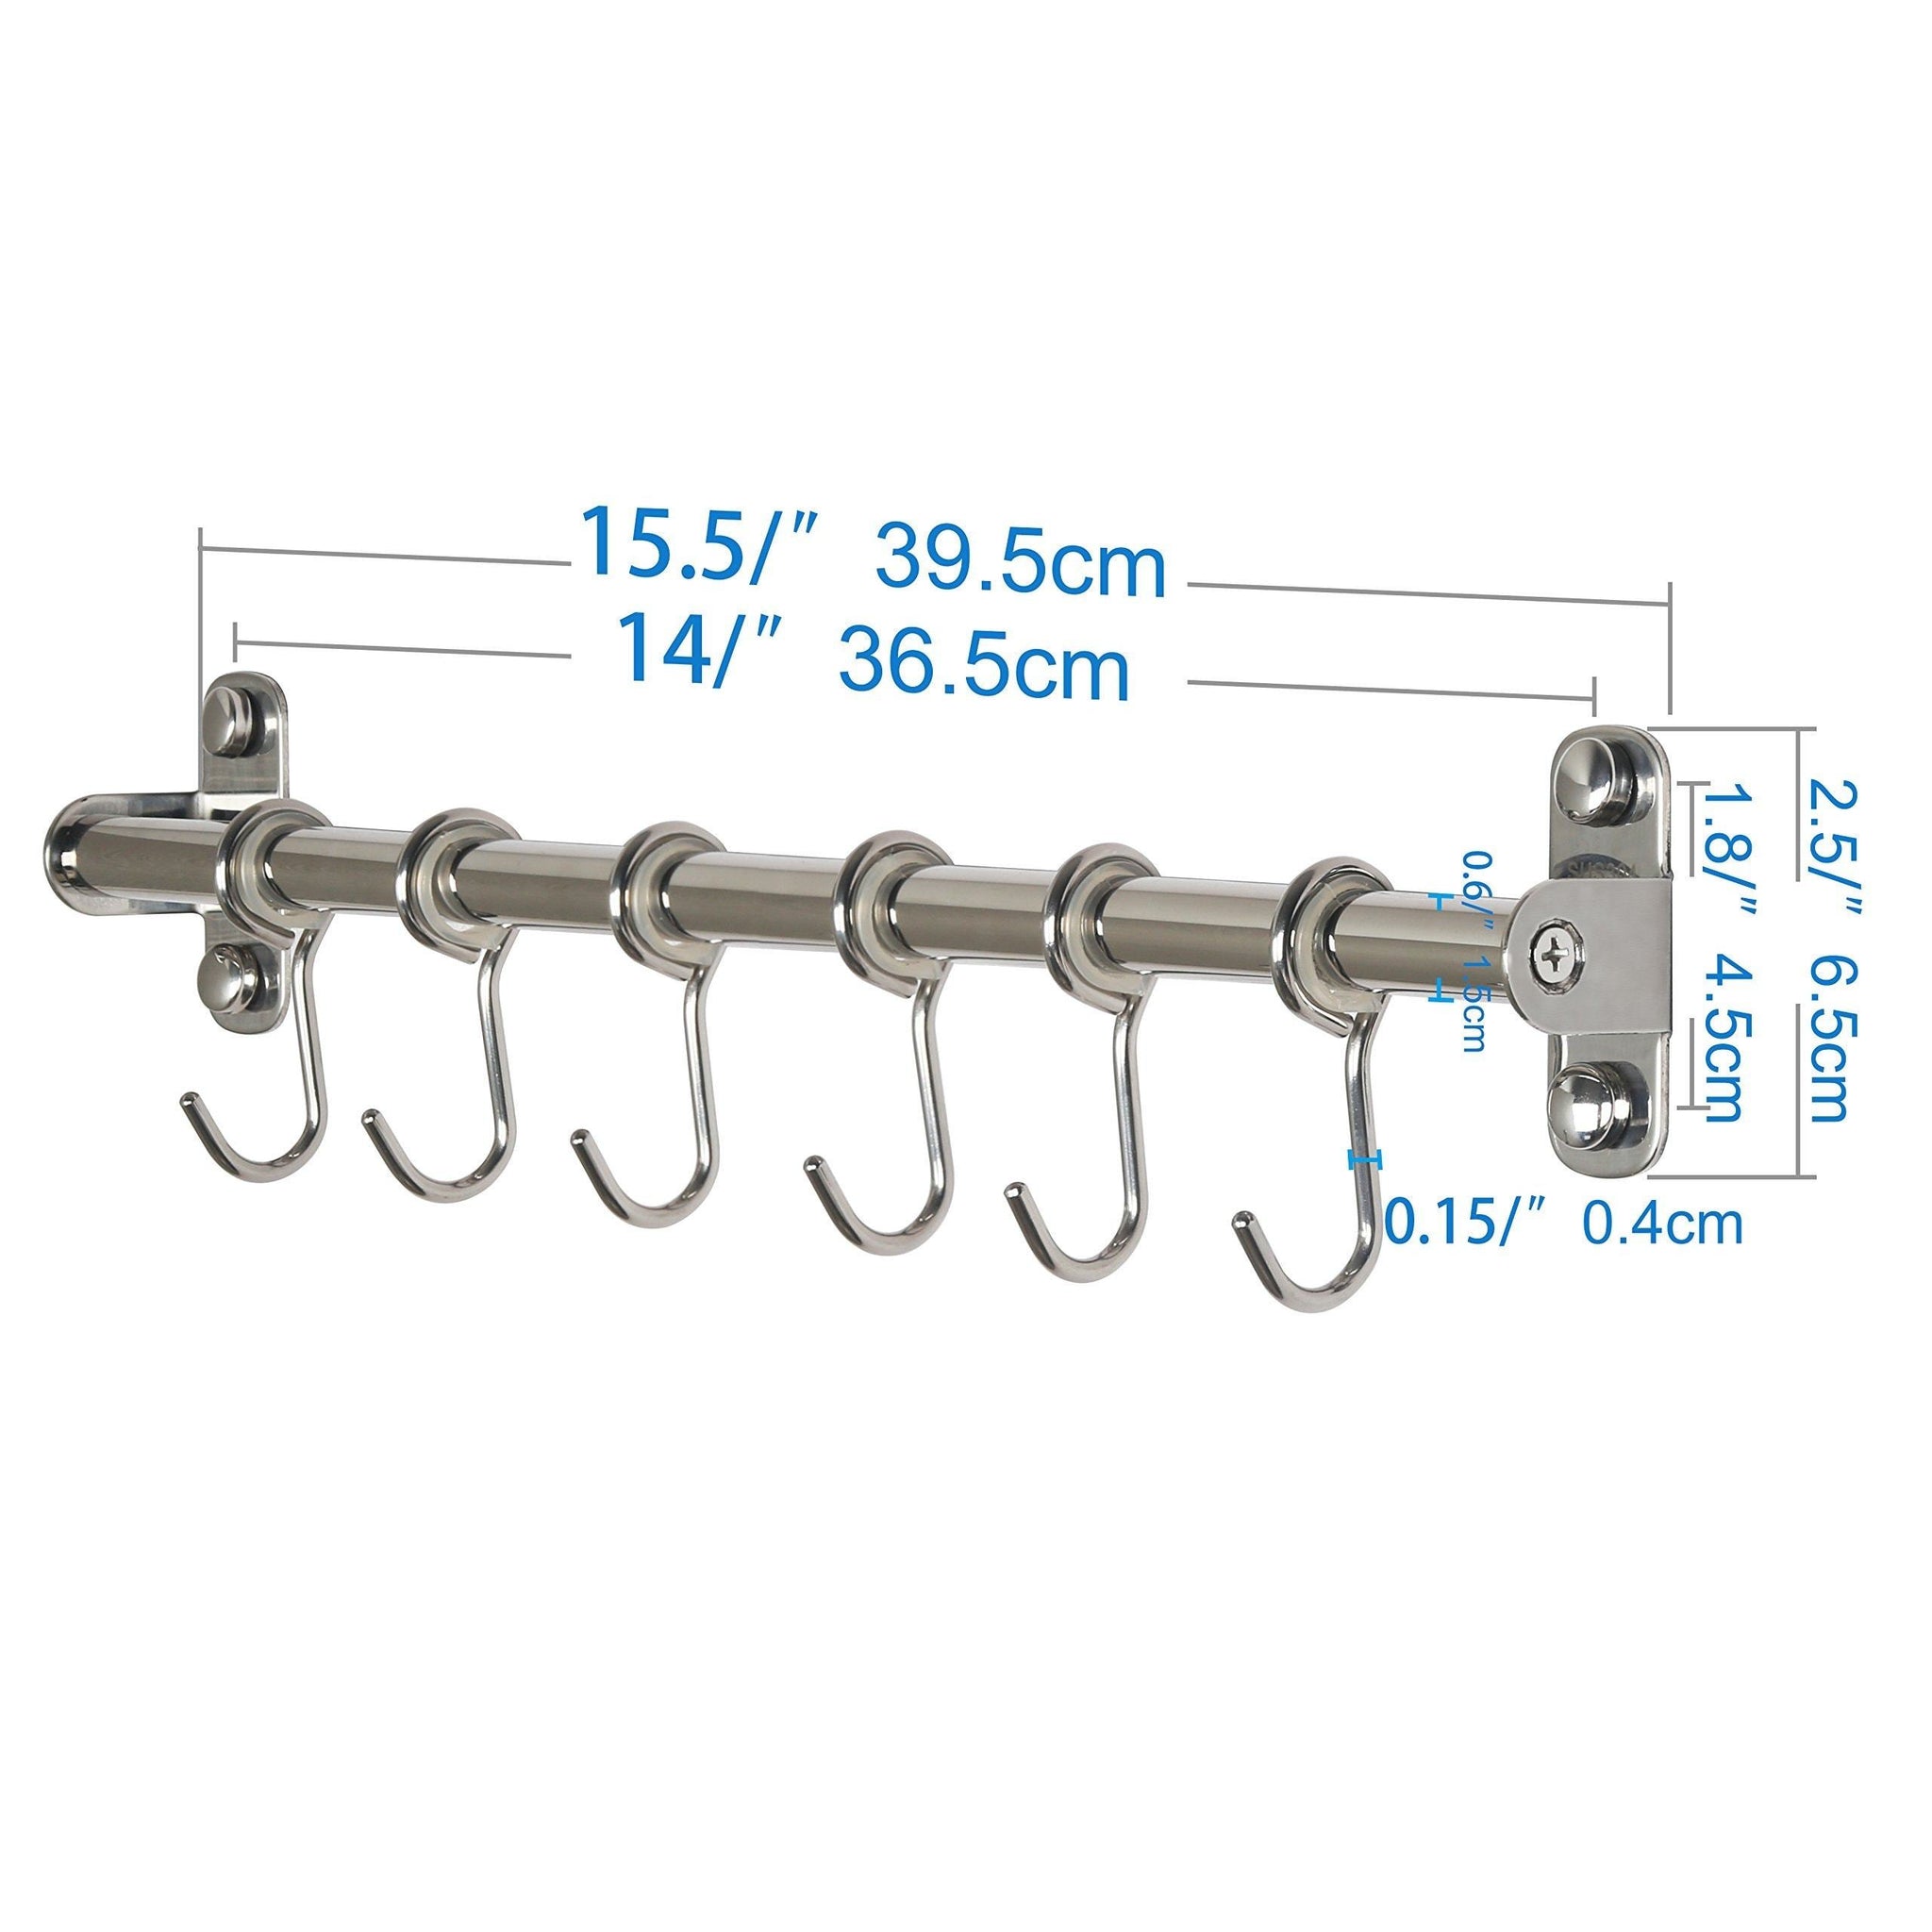 Buy now webi kitchen sliding hooks solid stainless steel hanging rack rail with 6 utensil removable s hooks for towel pot pan spoon loofah bathrobe wall mounted 2 packs